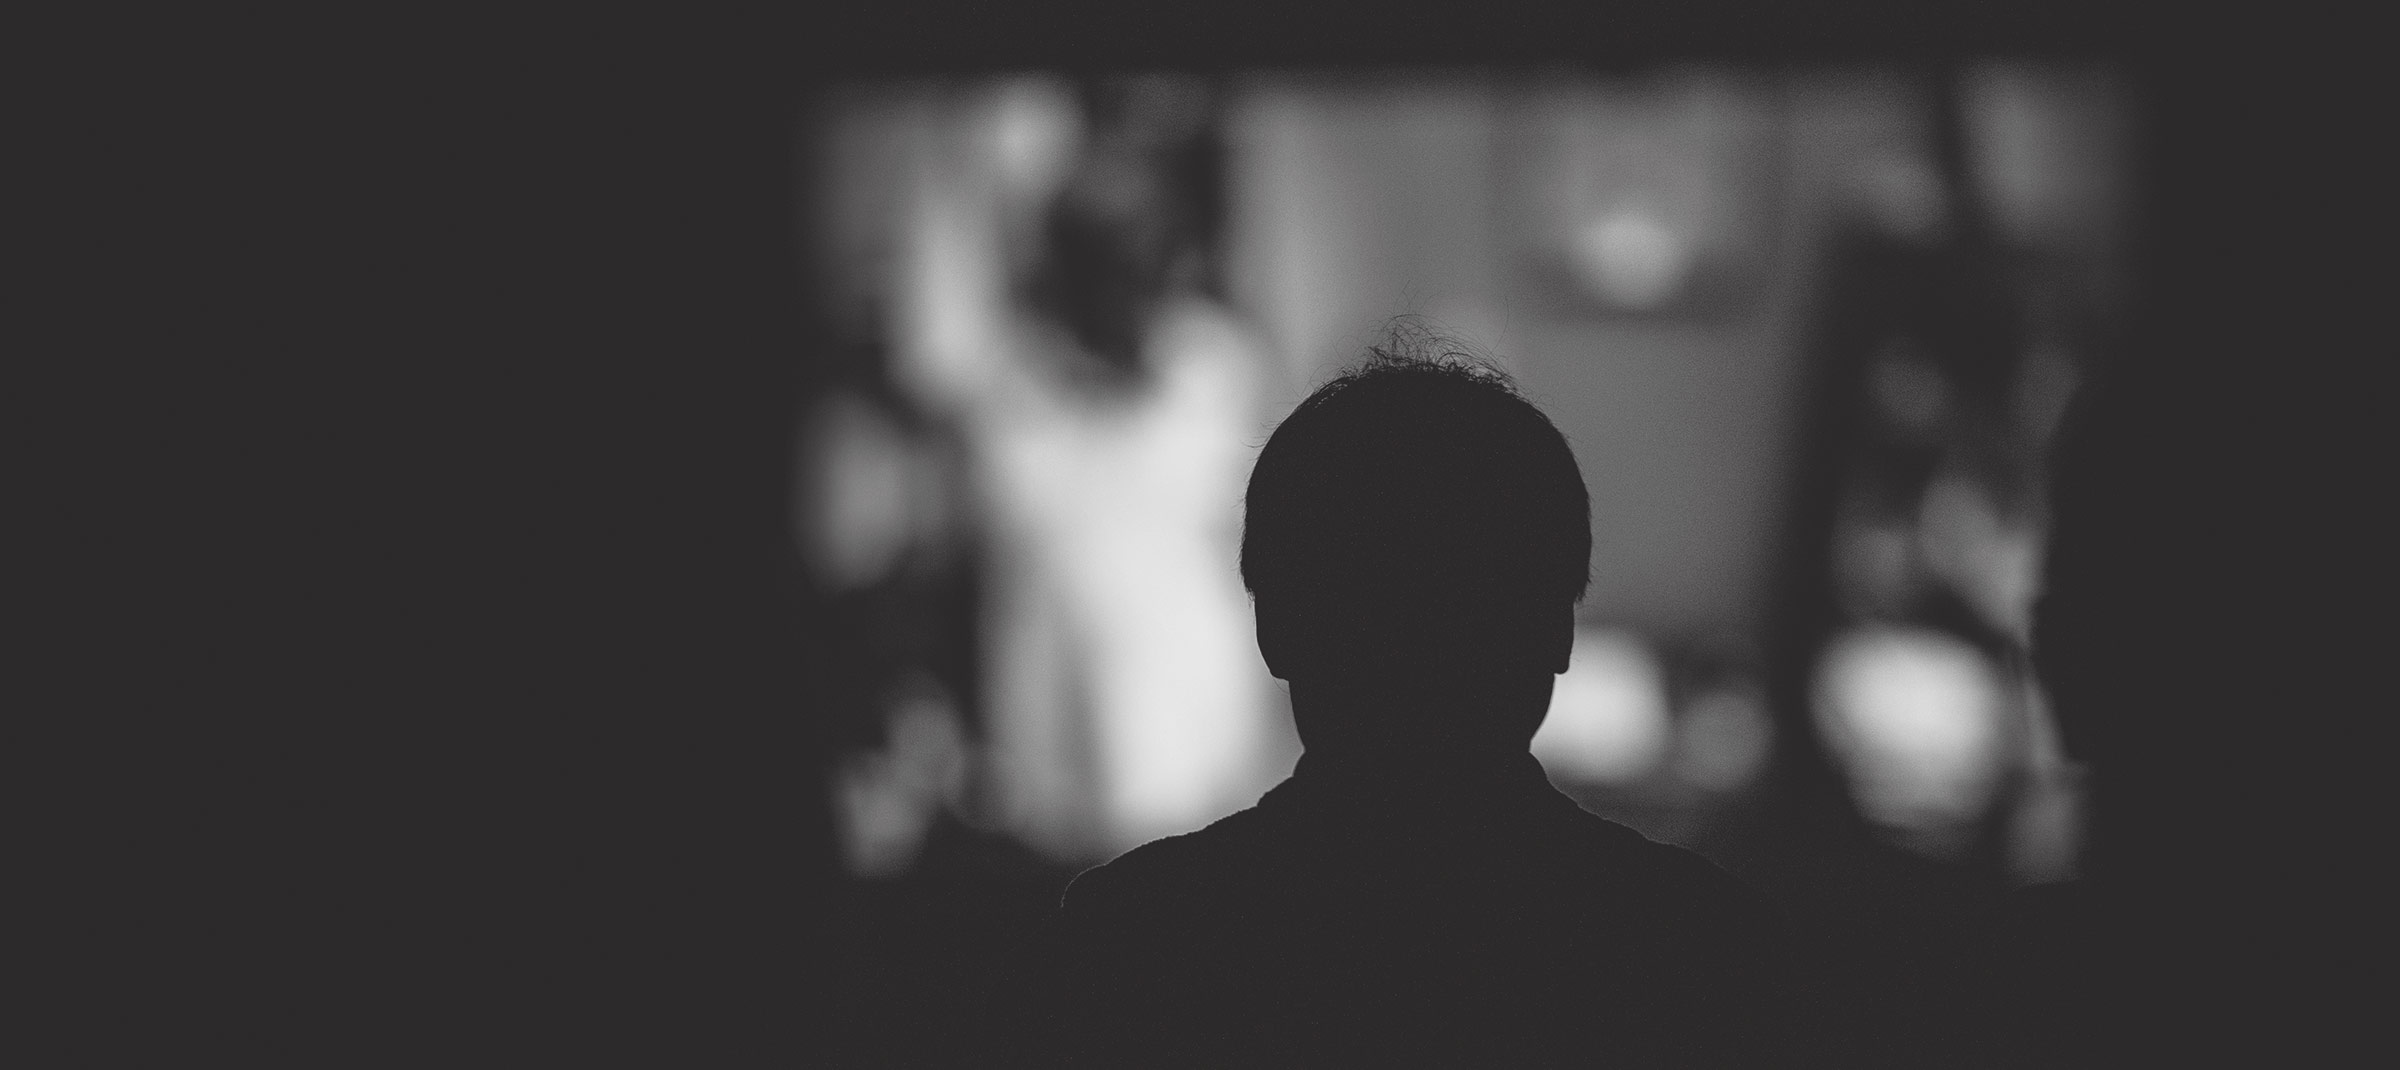 Silhouette of a man watching a film from behind, with out-of-focus screen in the background